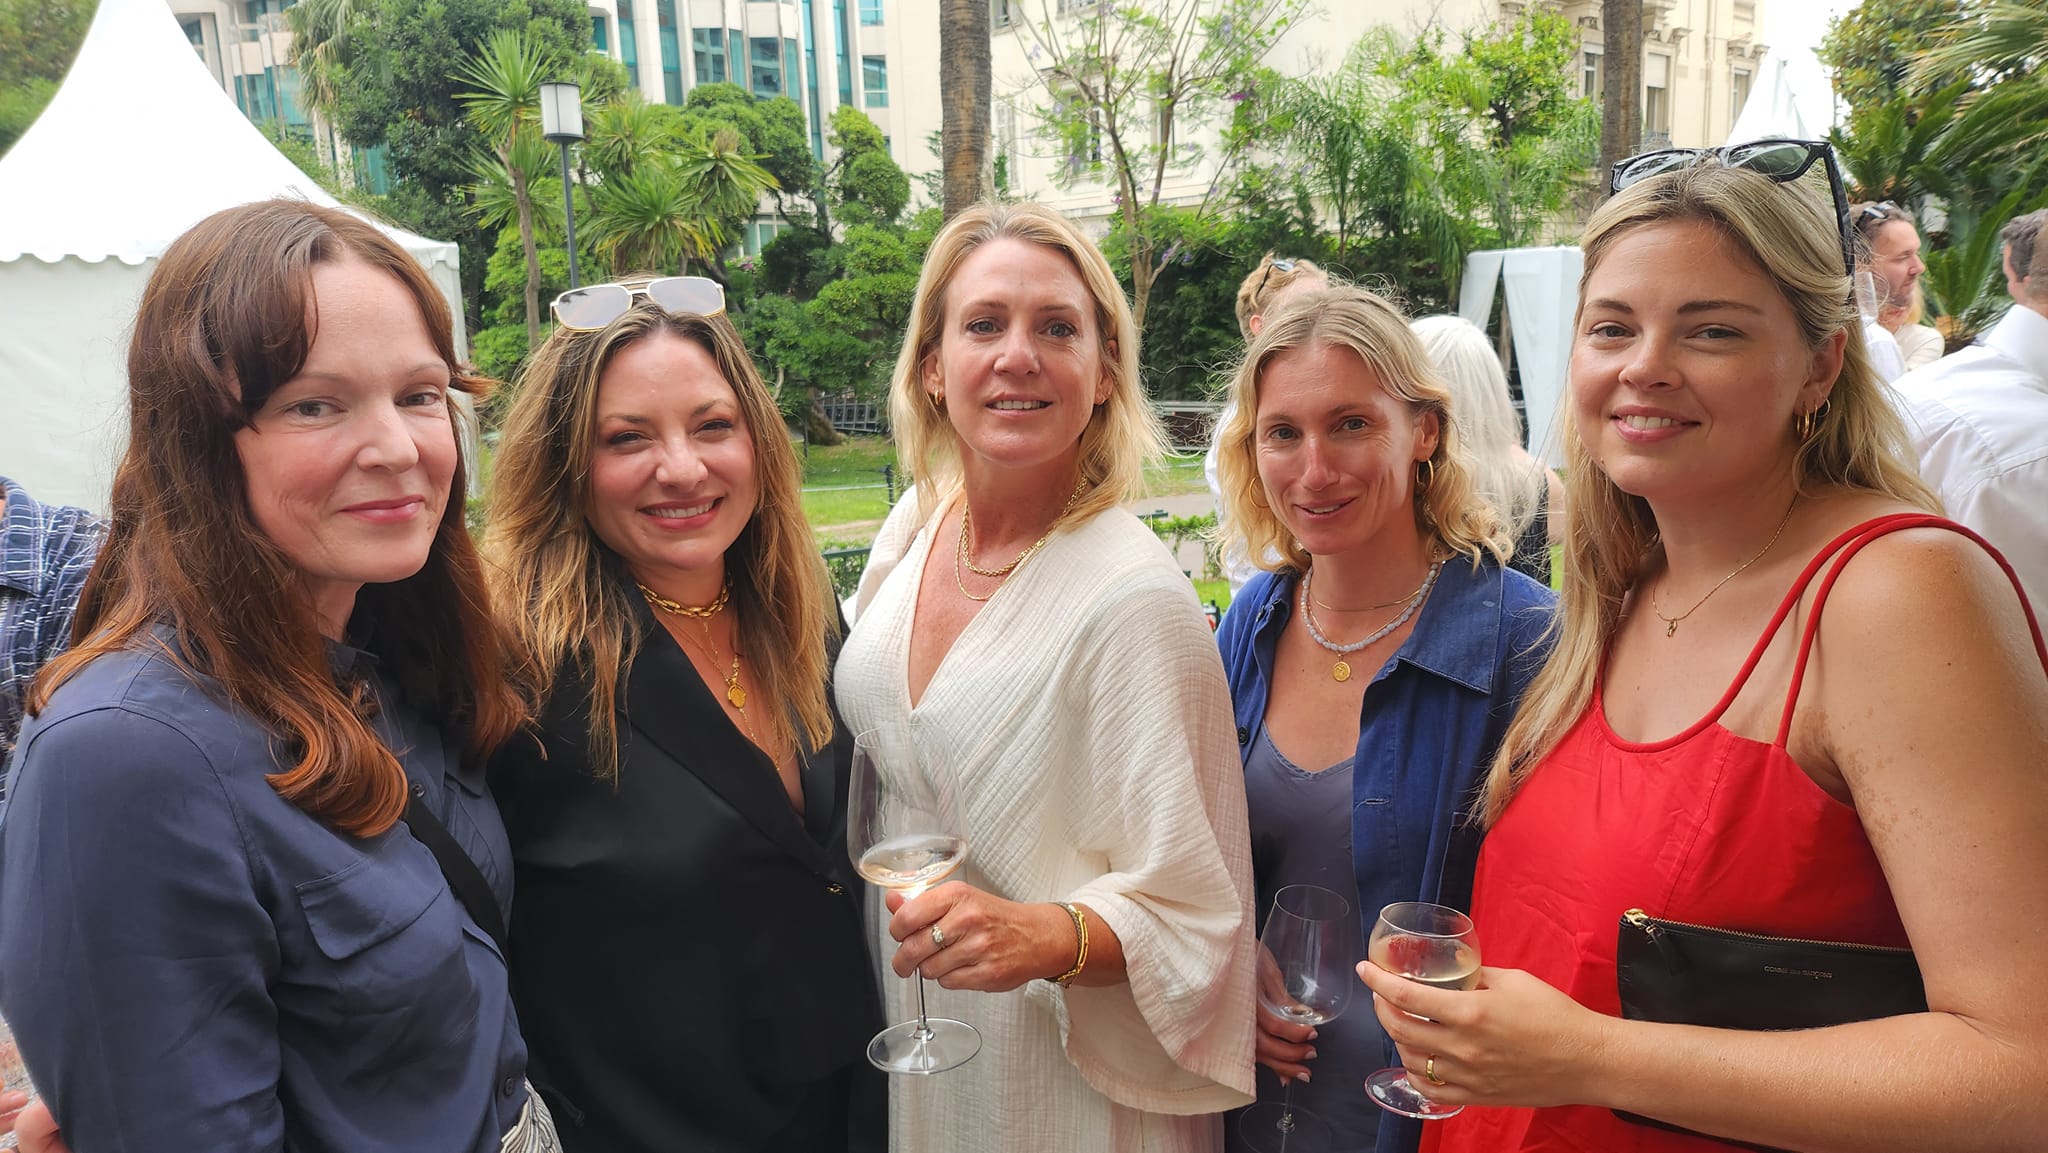 Aussie and Kiwi delegates treated to the annual Campaign Brief Cannes Welcome Cocktails courtesy of Photoplay, Rumble and Fin